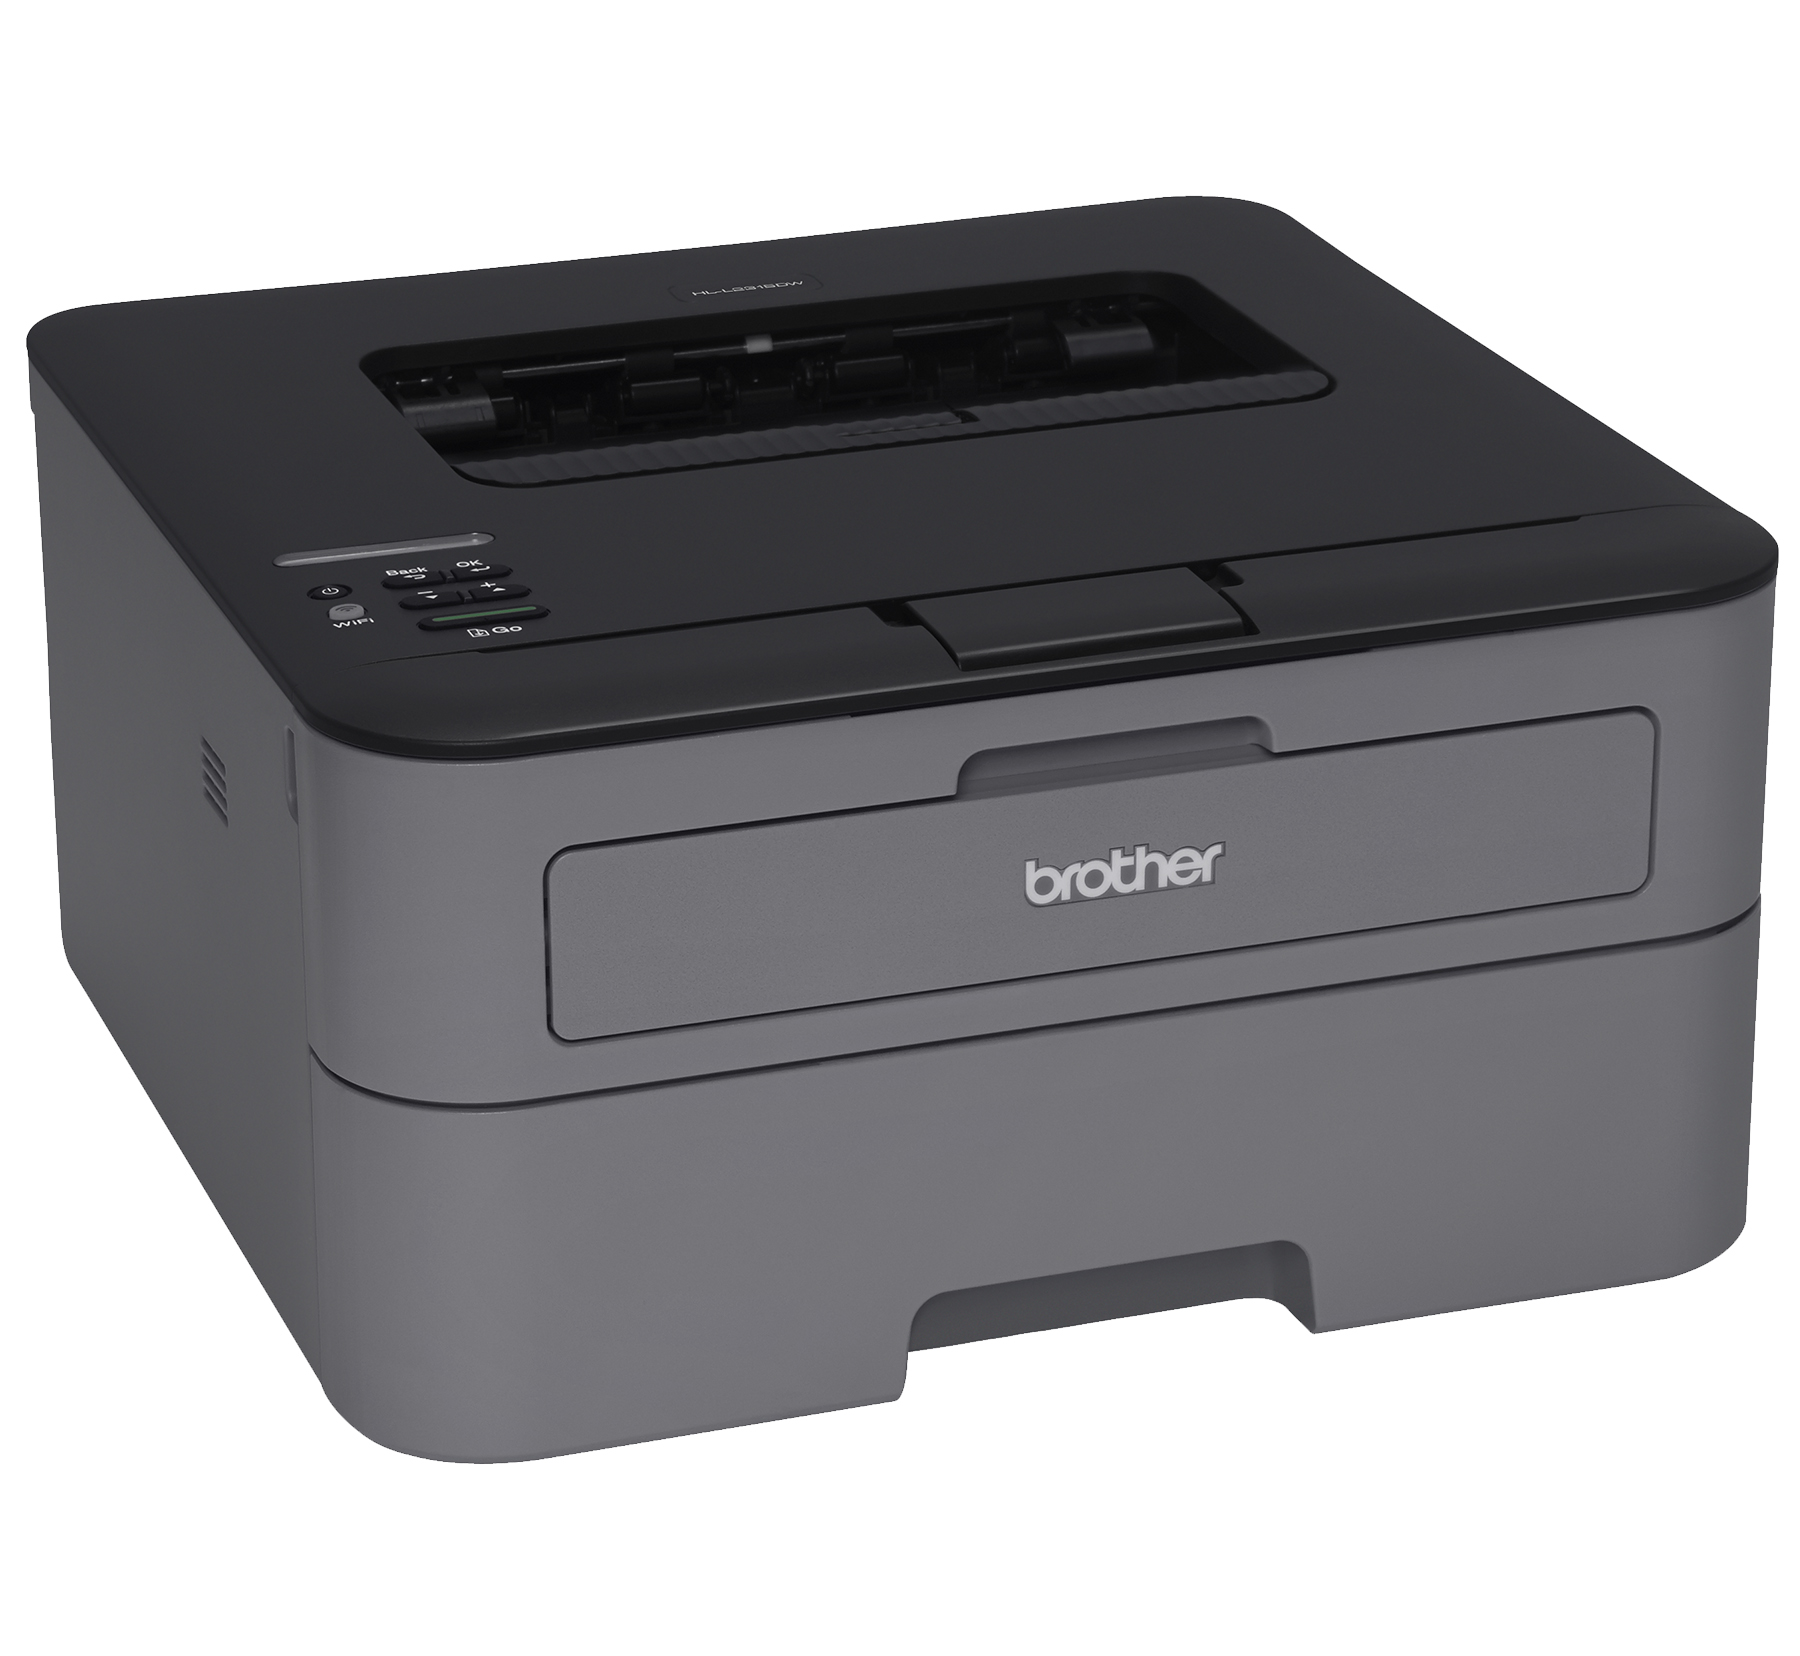 Brother Compact Monochrome Laser Printer, HL-L2315DW, Wireless Printing, Duplex Two-Sided Printing - image 4 of 6